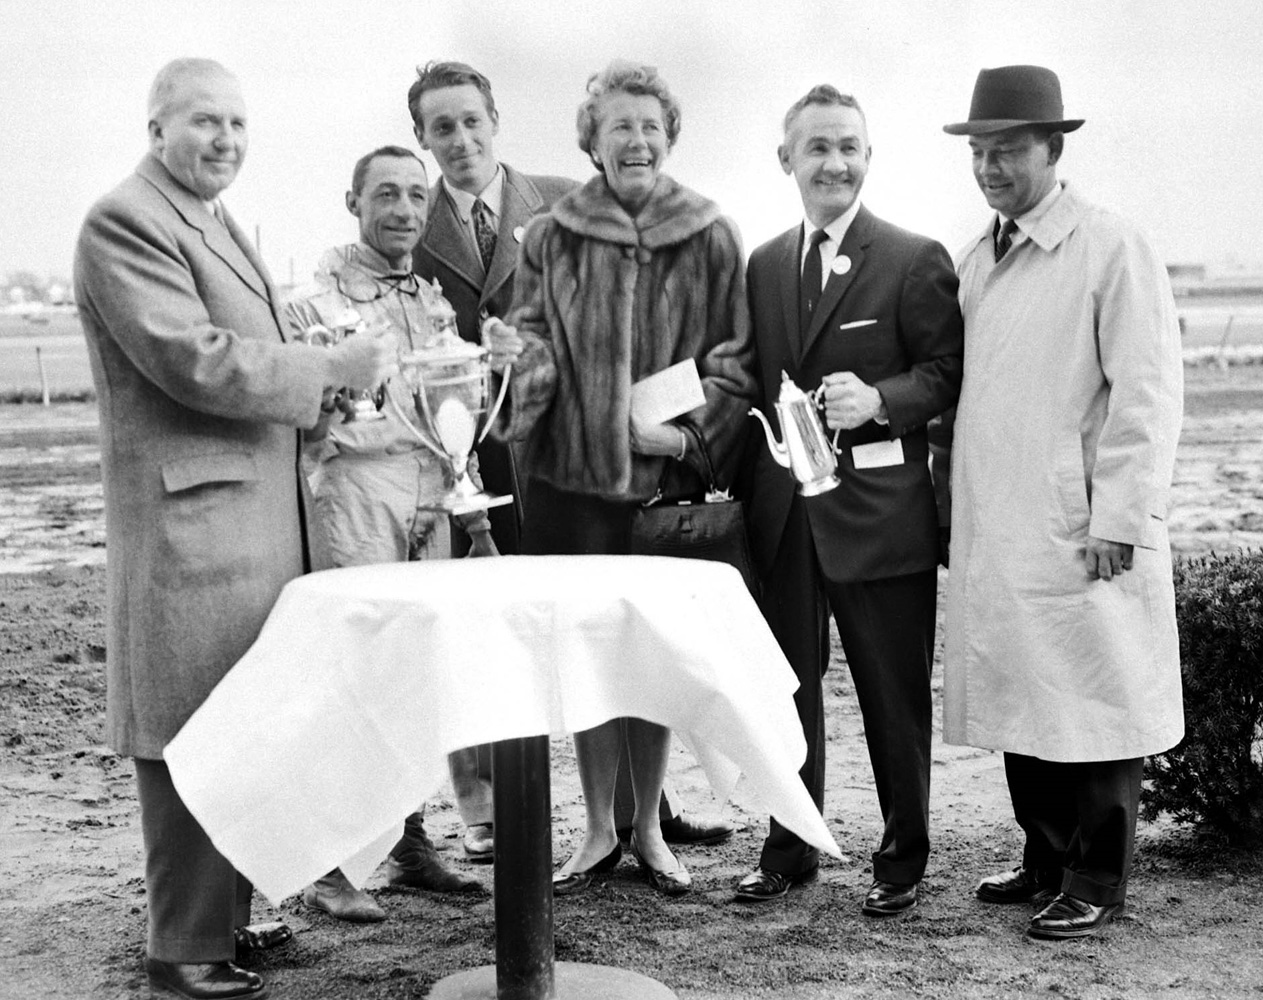 John Hanes, Eddie Arcaro, Simon Wetherby, Allaire du Pont, and Carl Hanford at the trophy presentation for Kelso's 1960 Jockey Club Gold Cup win (Keeneland Library Morgan Collection)